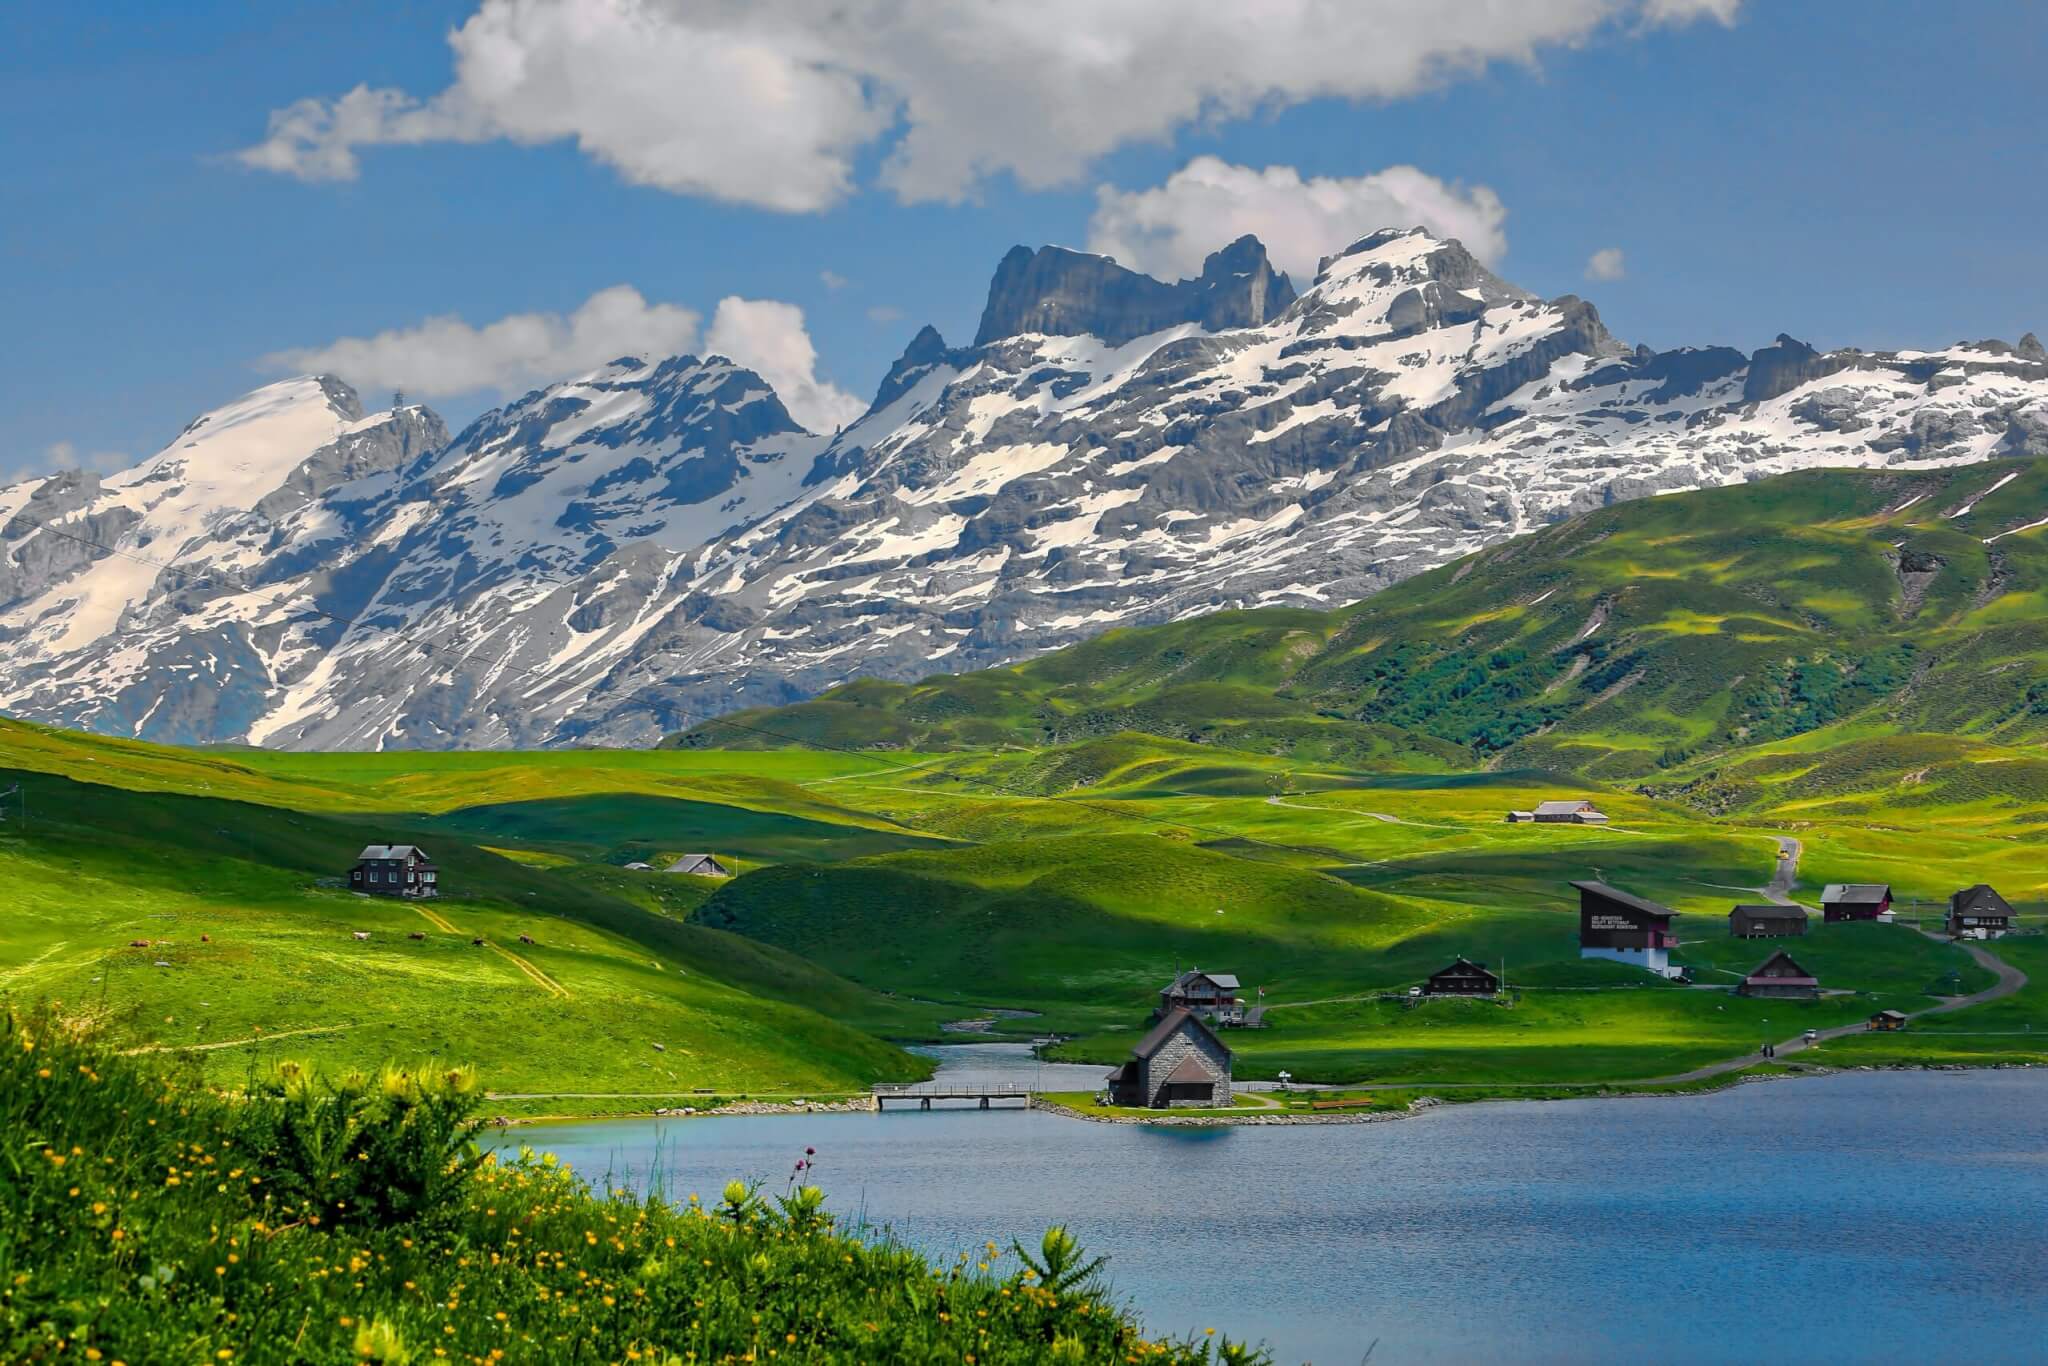 Spring in the Swiss Alps with a pond and green grass